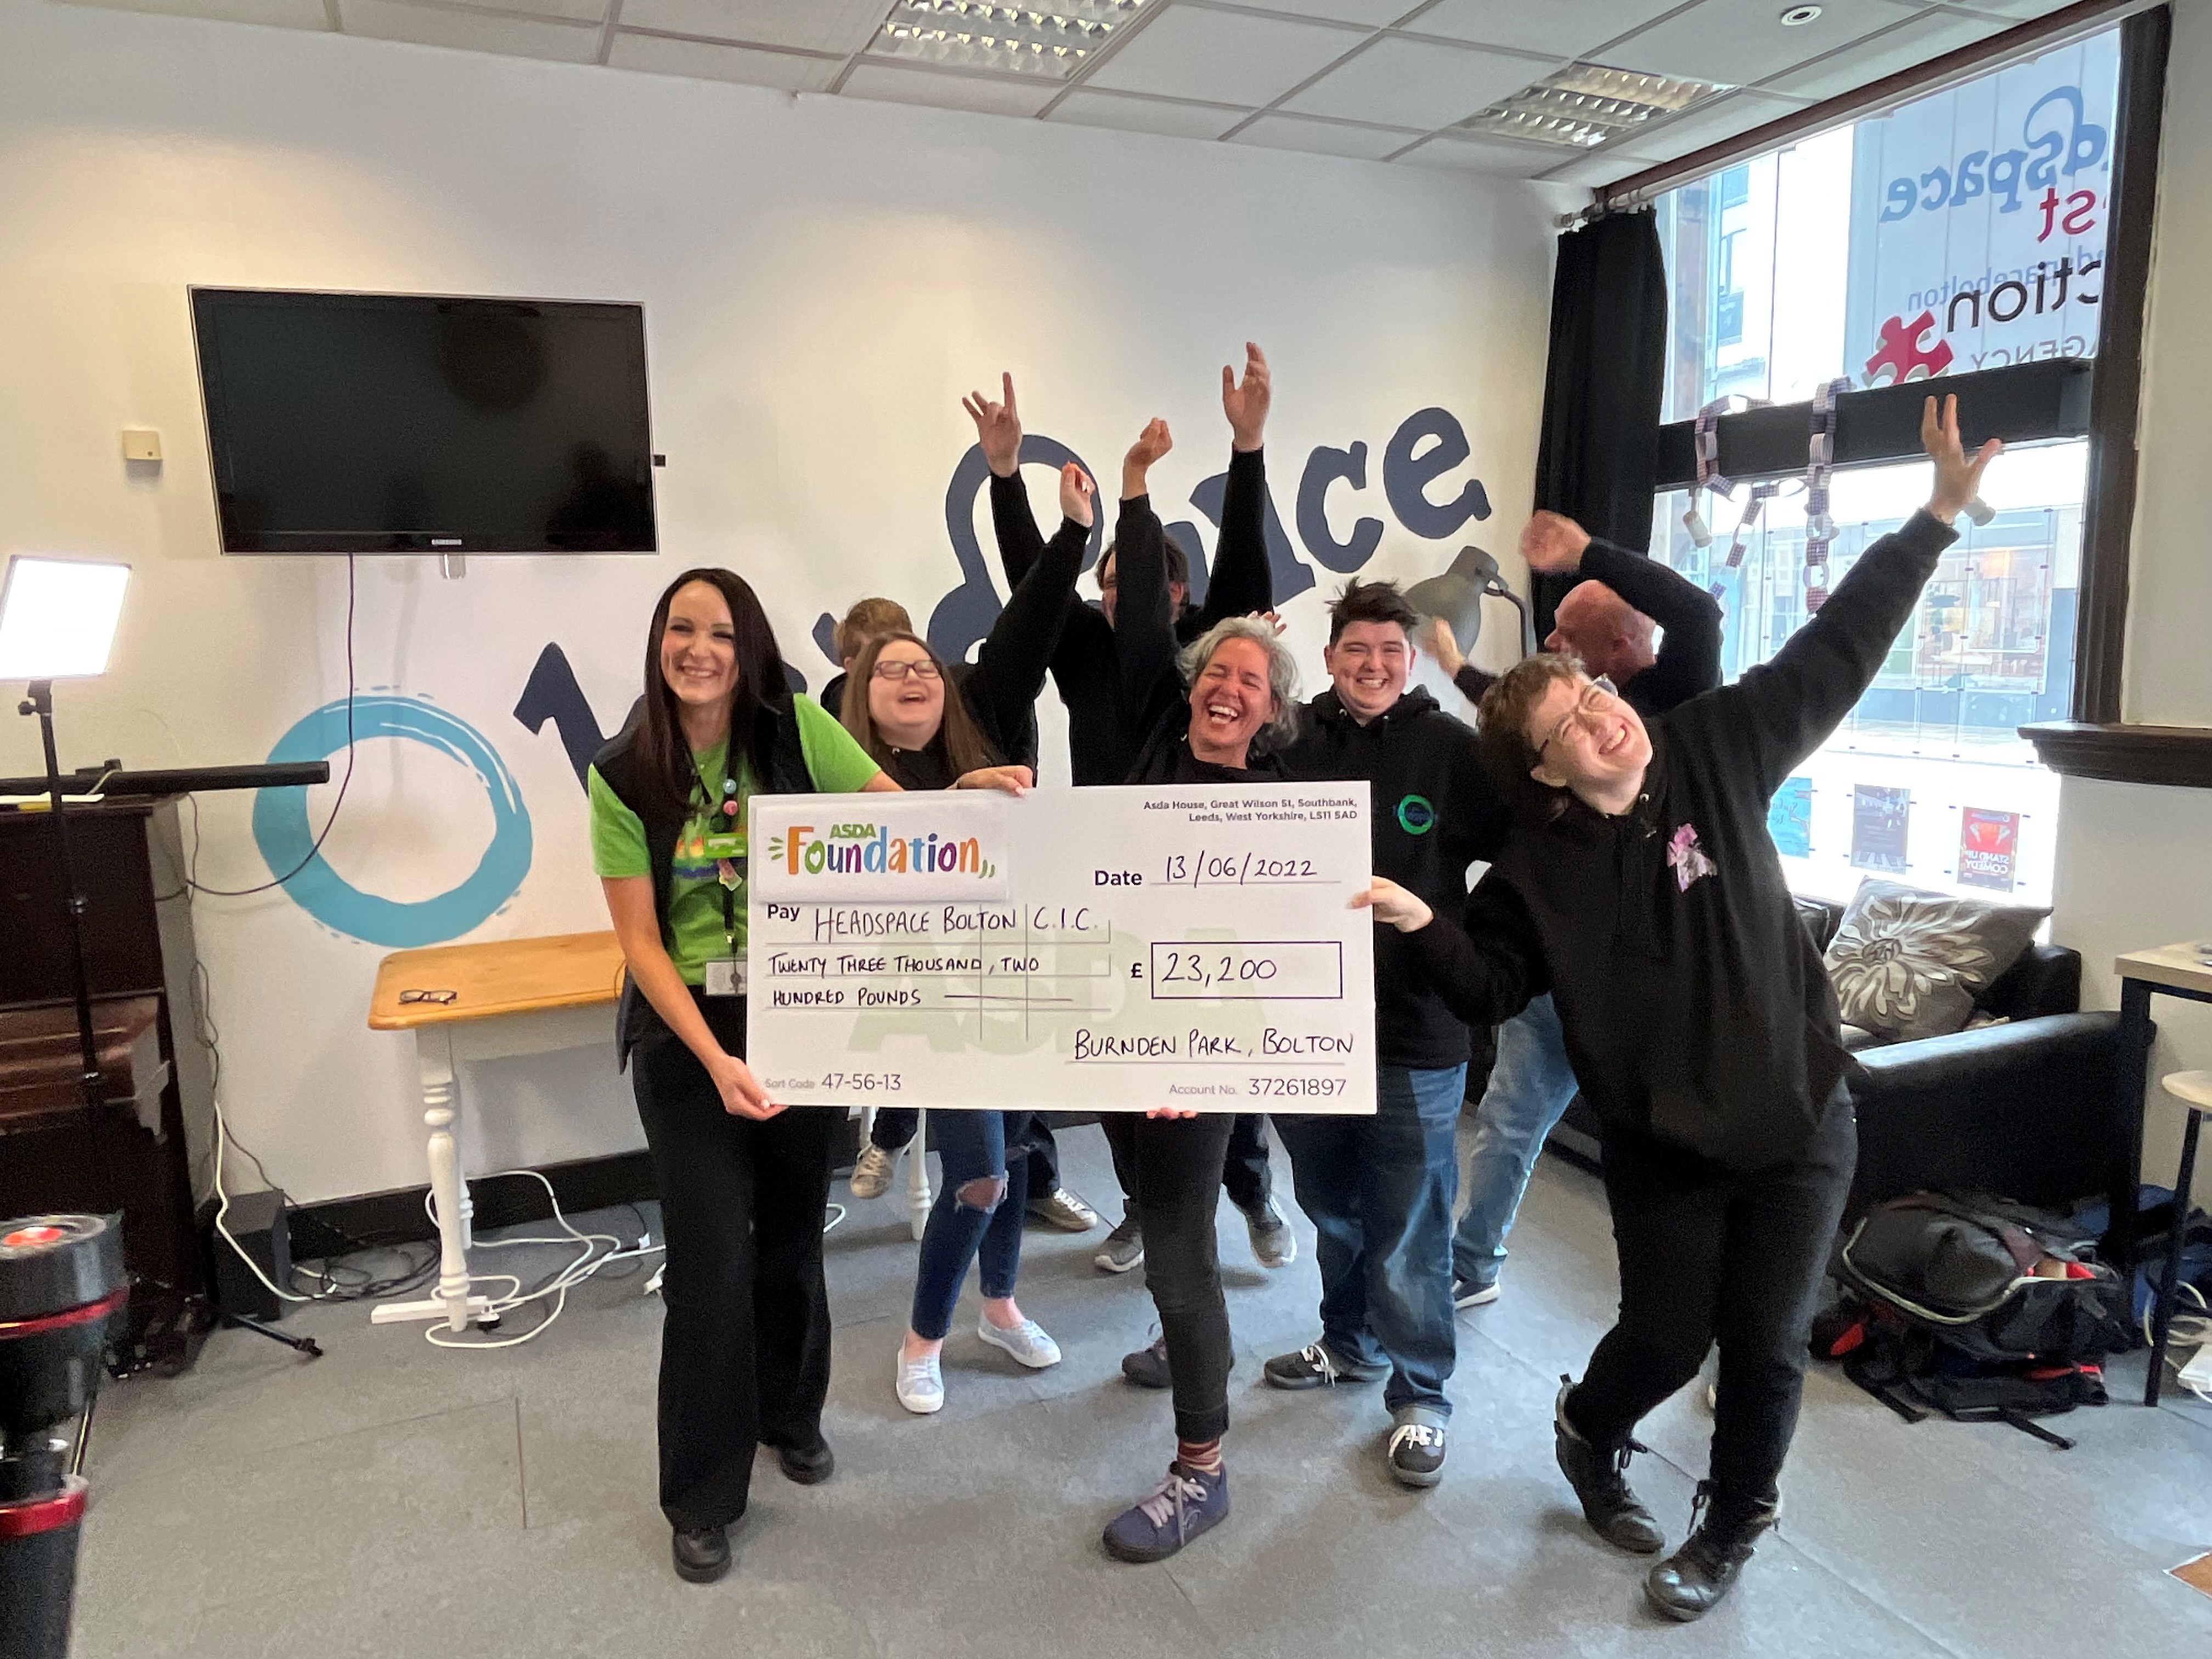 Headspace Bolton CIC were delighted to receive a cheque for £23,200 